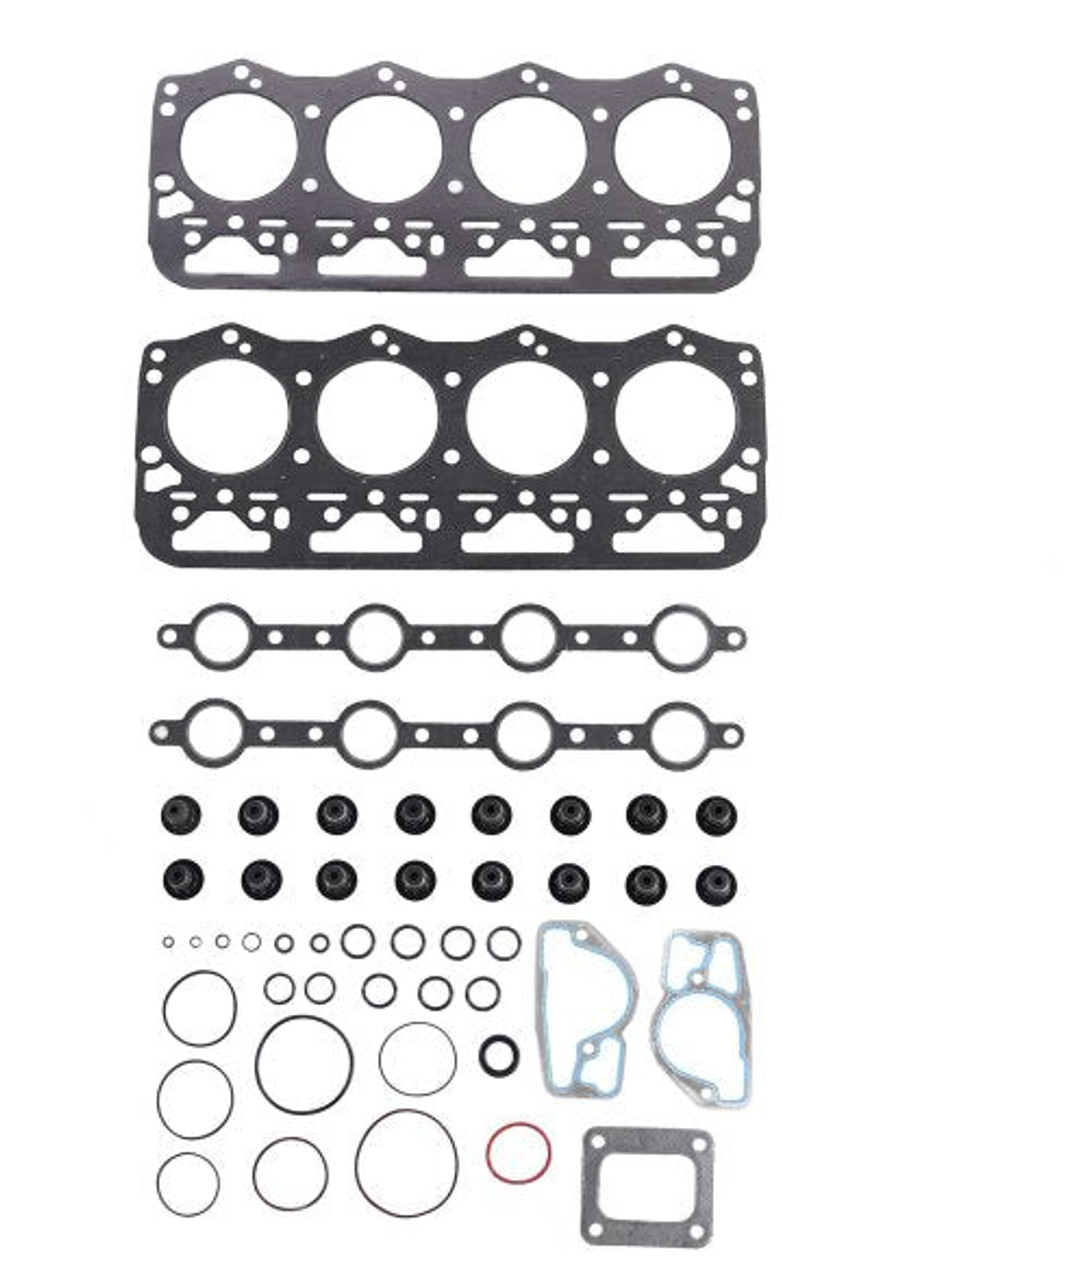 Head Gasket Set with Head Bolt Kit - 1995 Ford F-250 7.3L Engine Parts # HGB4200ZE44